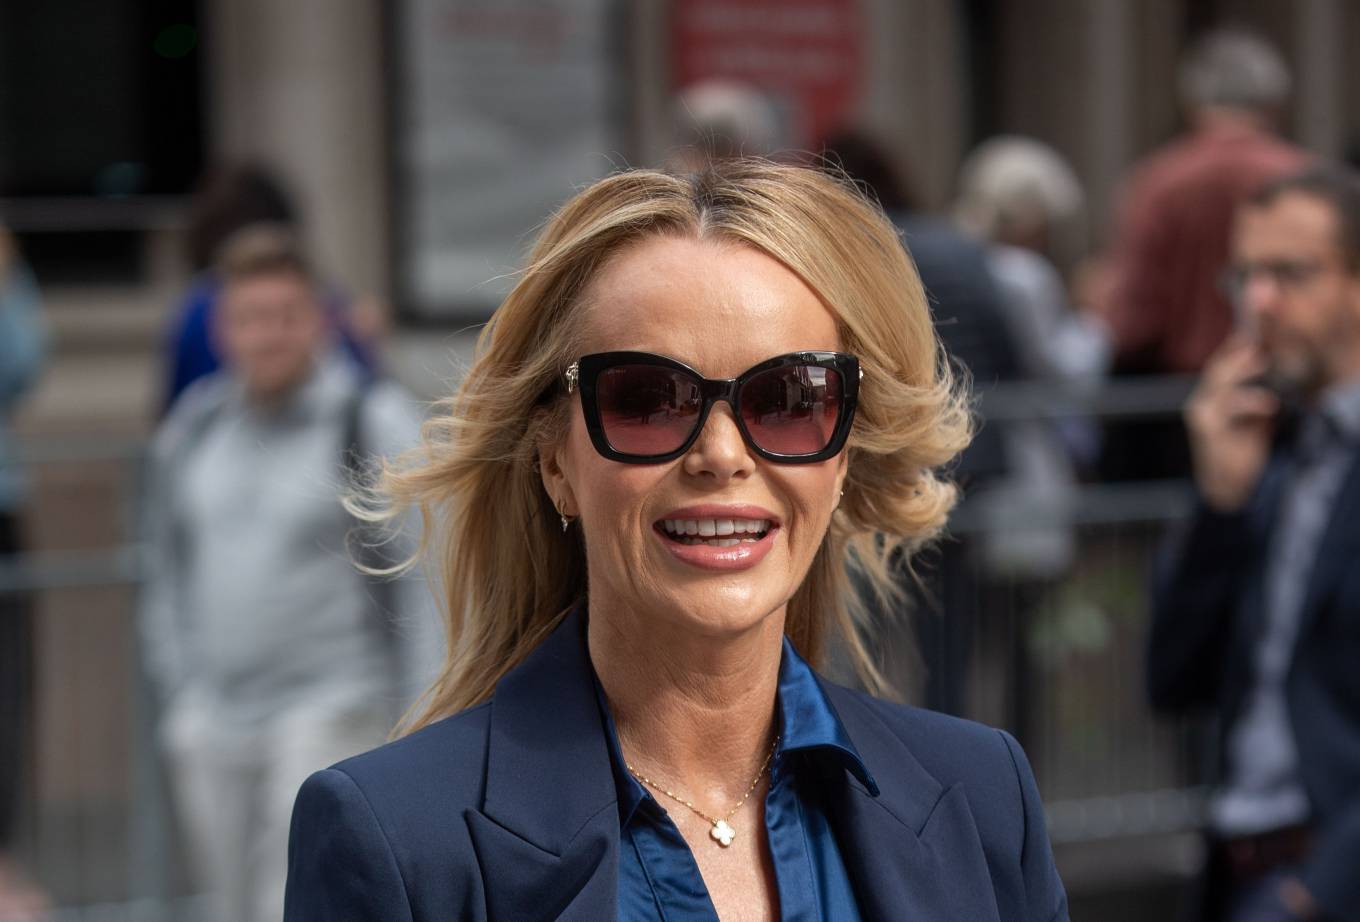 Amanda Holden - Pictured outside the Global Radio Studios in London